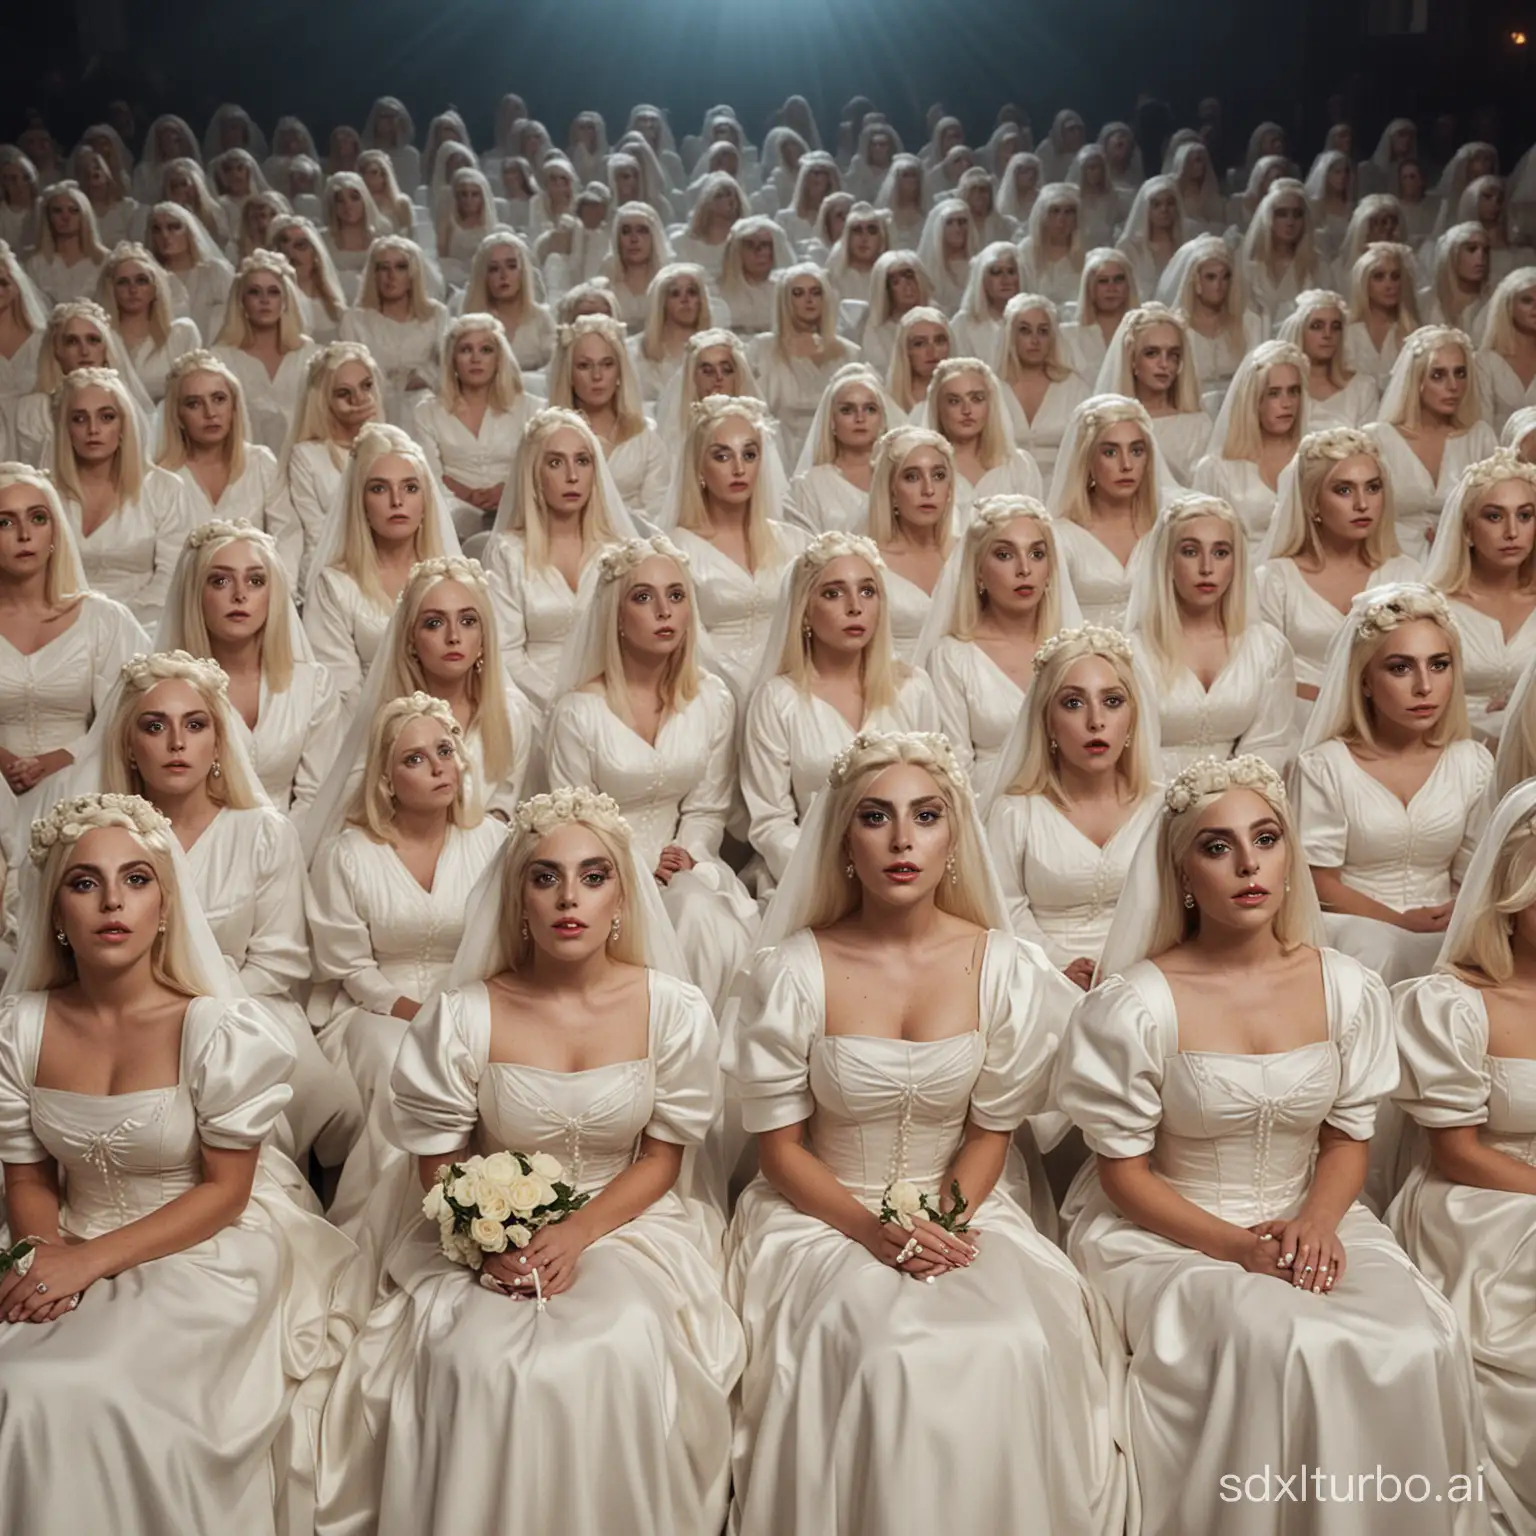 Crowd of Lady Gaga and her clones dressed as brides gathered sitting in the cinema